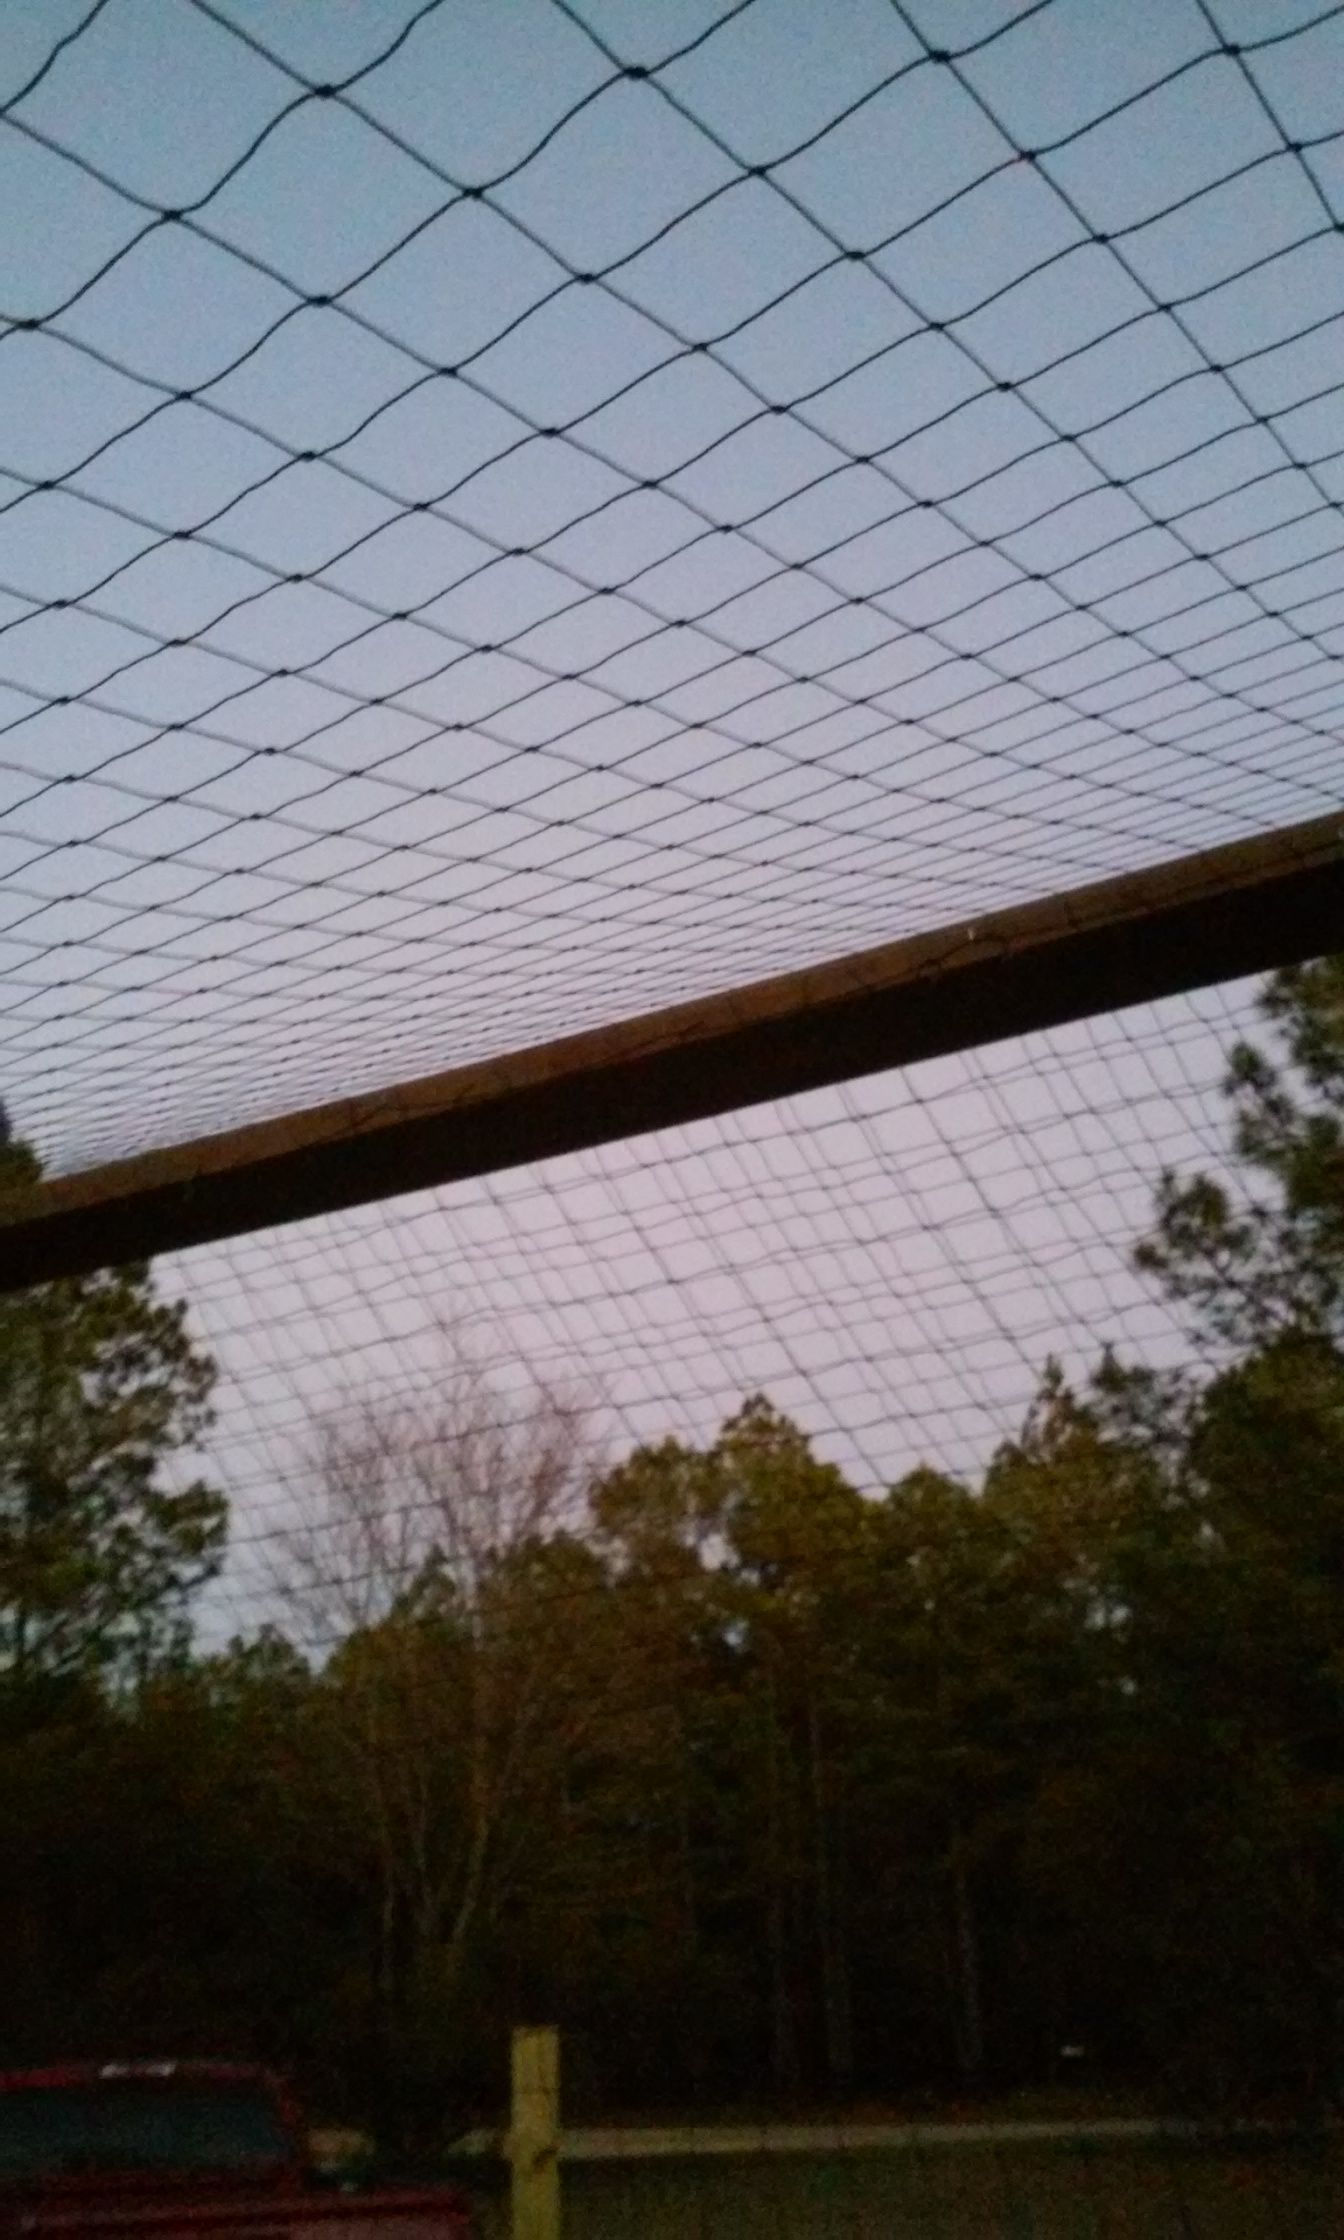 Hawk net is up and secure.